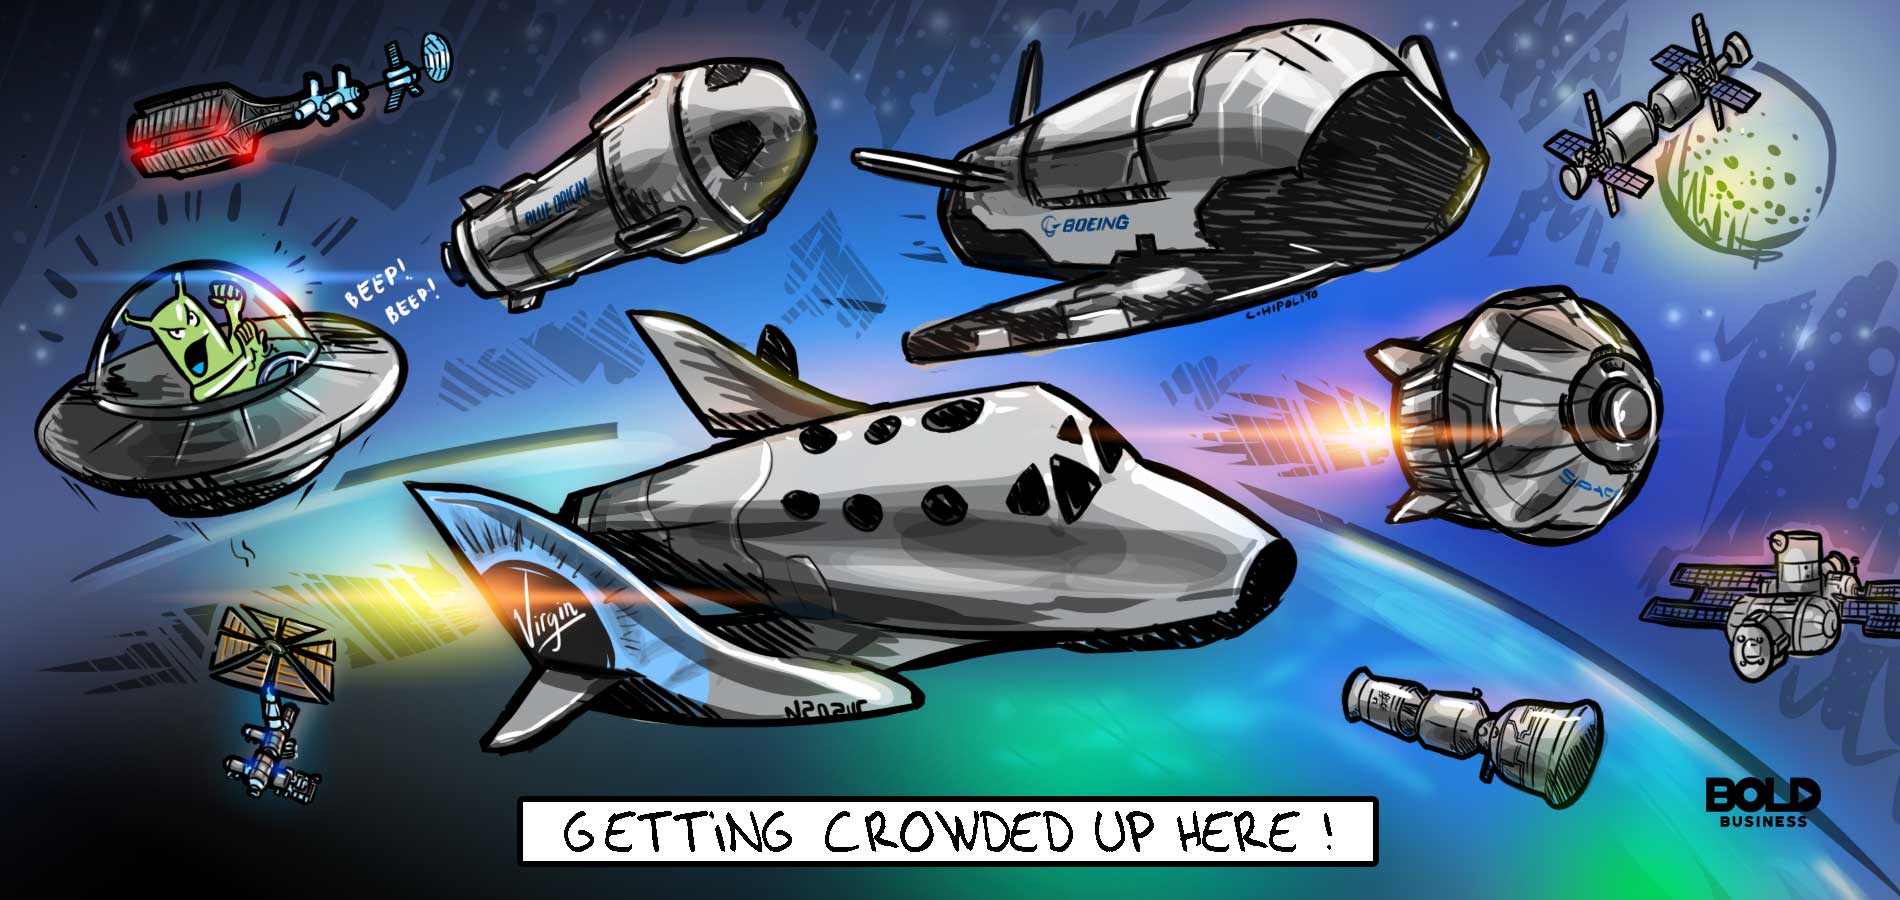 cartoon of spaceships flying across and crowding outer space, depicting the race happening in the space tourism industry